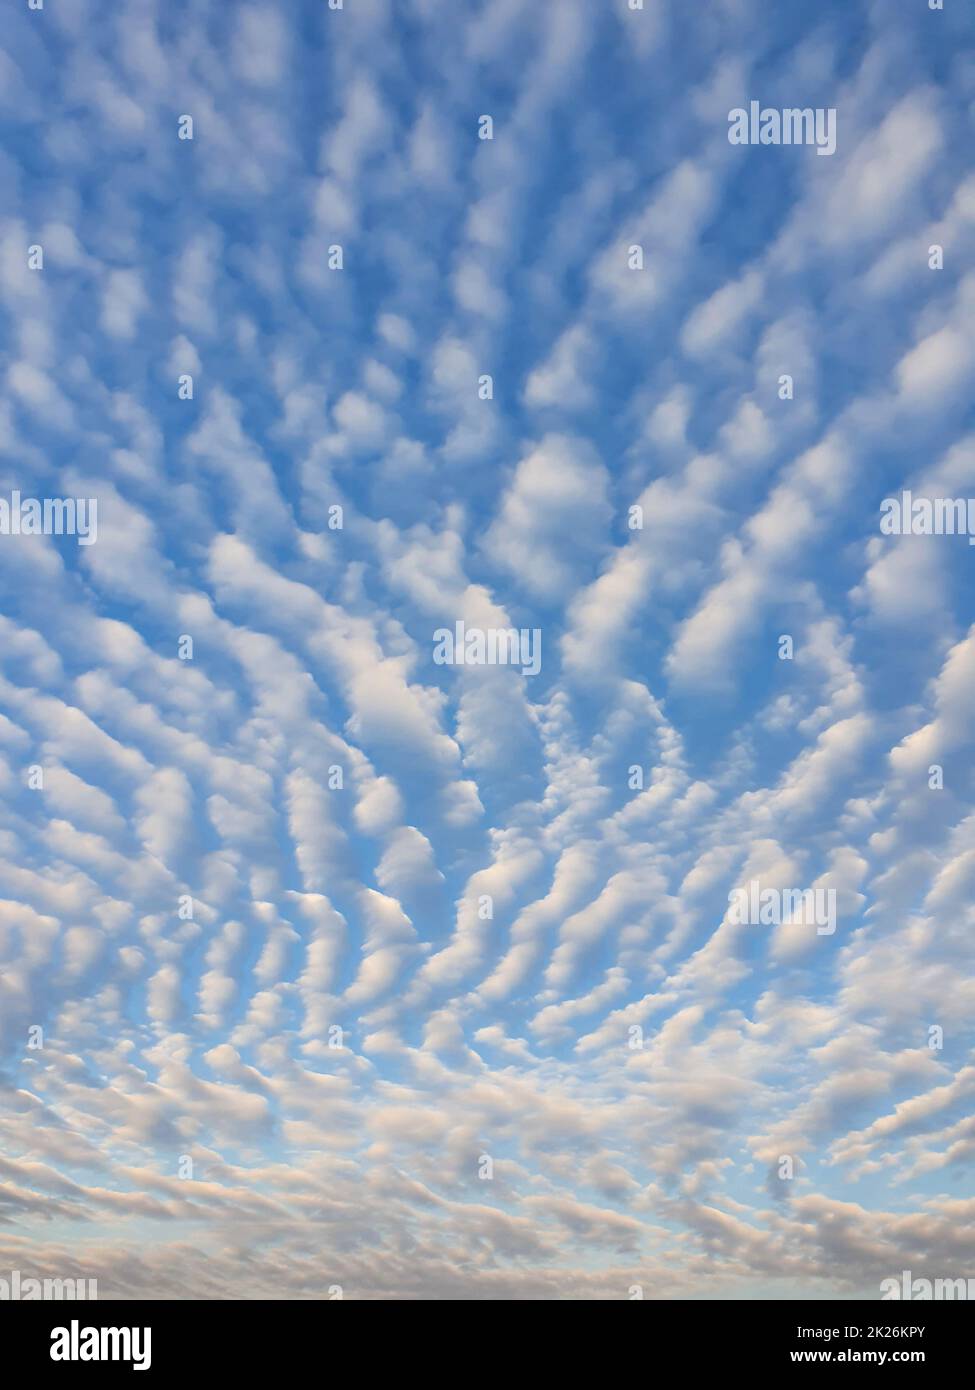 Abstract cloudscape scene. Beautiful sky background with fluffy clouds texture. Marvelous aerial composition, overcast shapes and patterns. Air freshness and celestial beauty Stock Photo